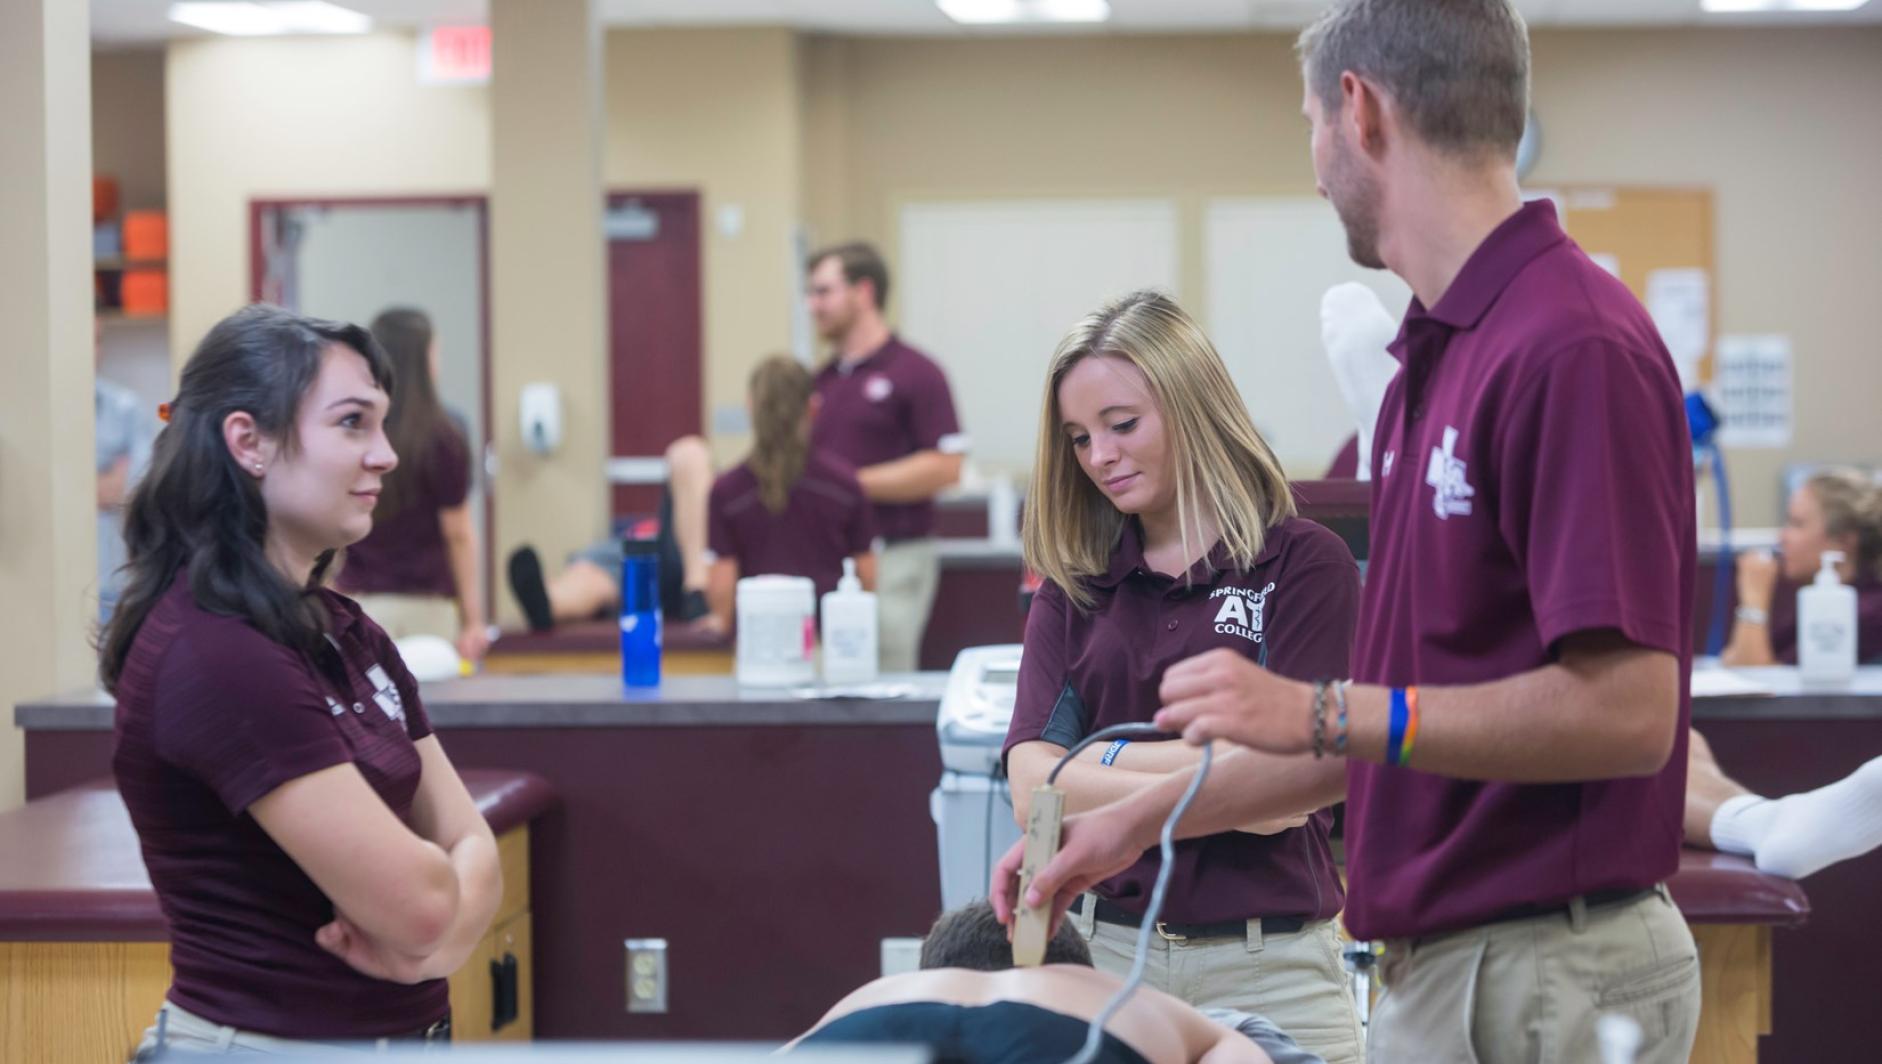 An athletic training student performs treatment on a client's back int he athletic training facility